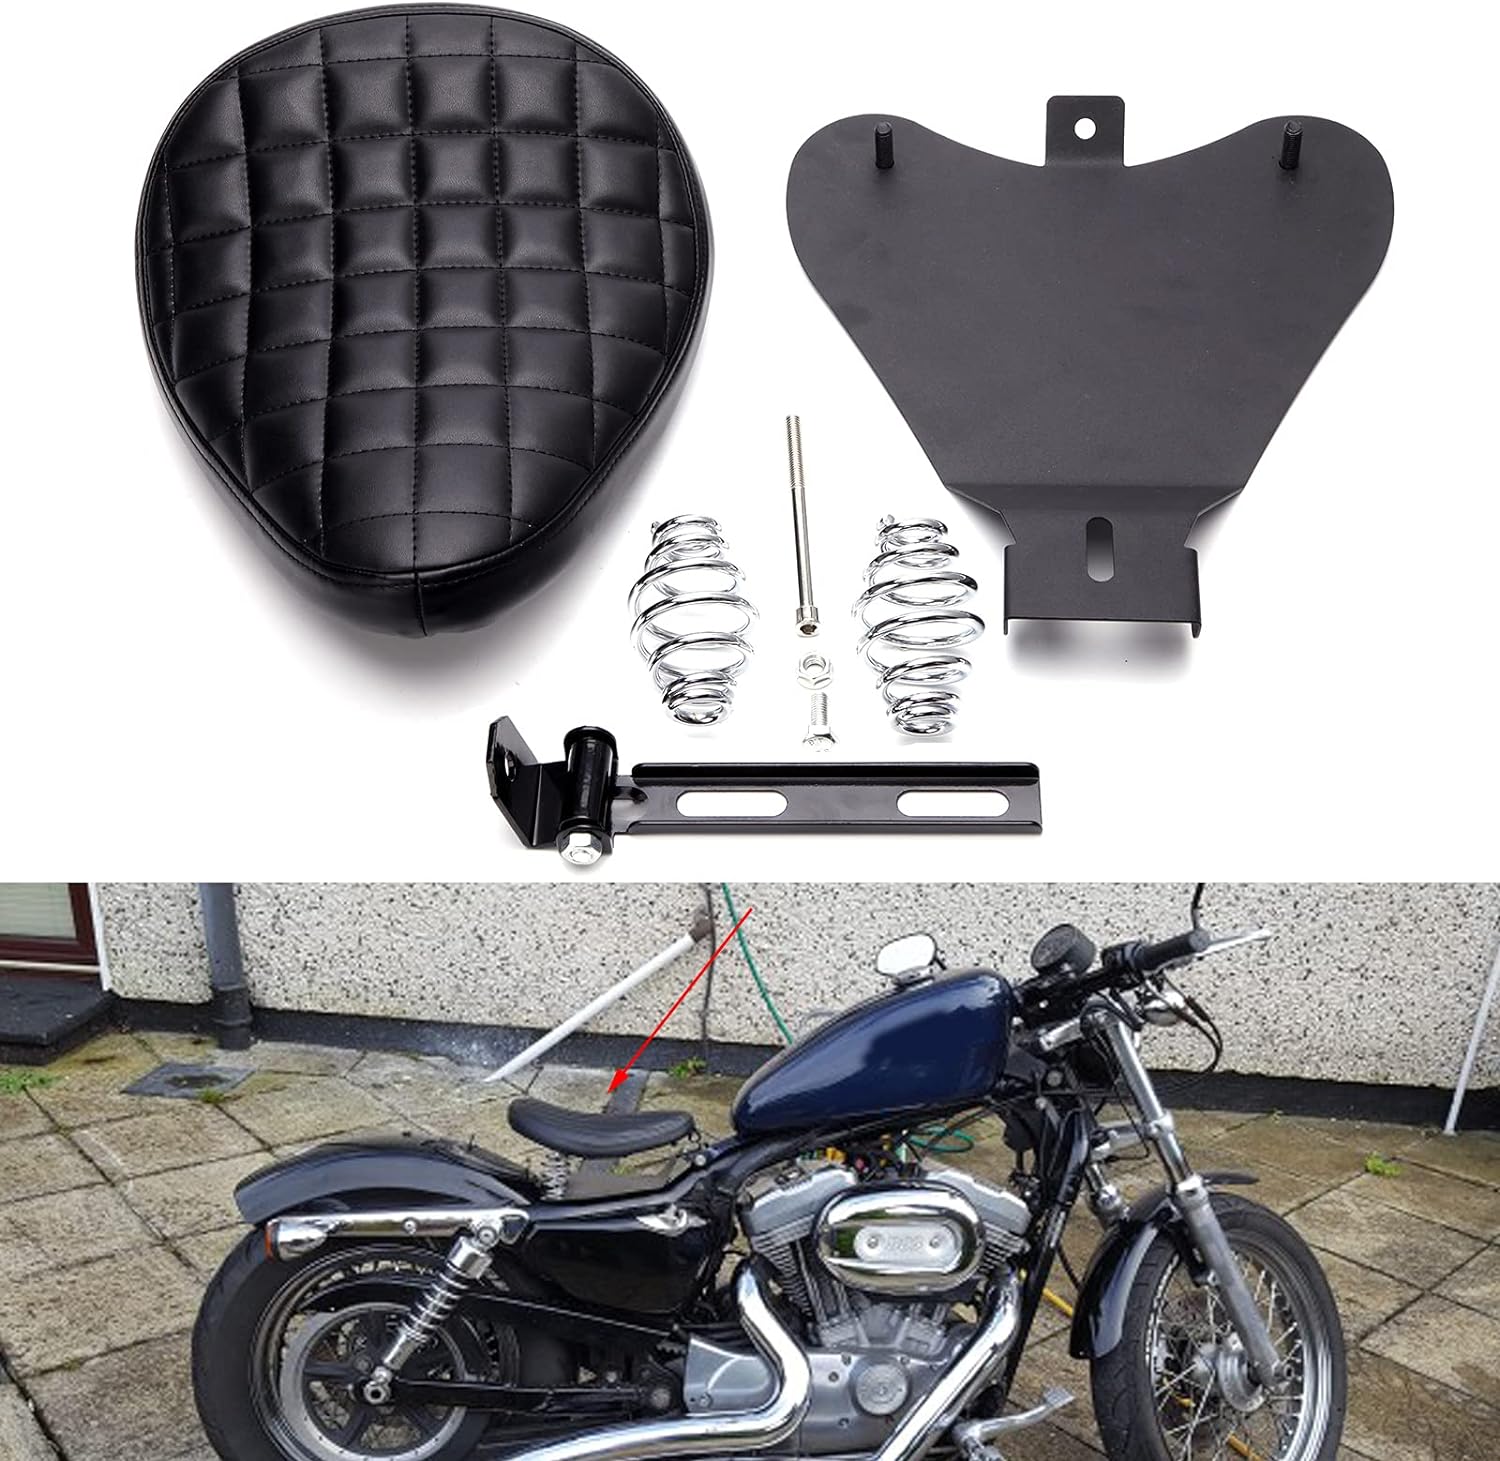 Crocodile Leather Motorcycle Bobber Solo Seat Spring Base Plate Bracket Kit For Harley Sportster XL 883 1200 48 (Black-Crocodile Leather) - Crocodile Leather Motorcycle Seat Review